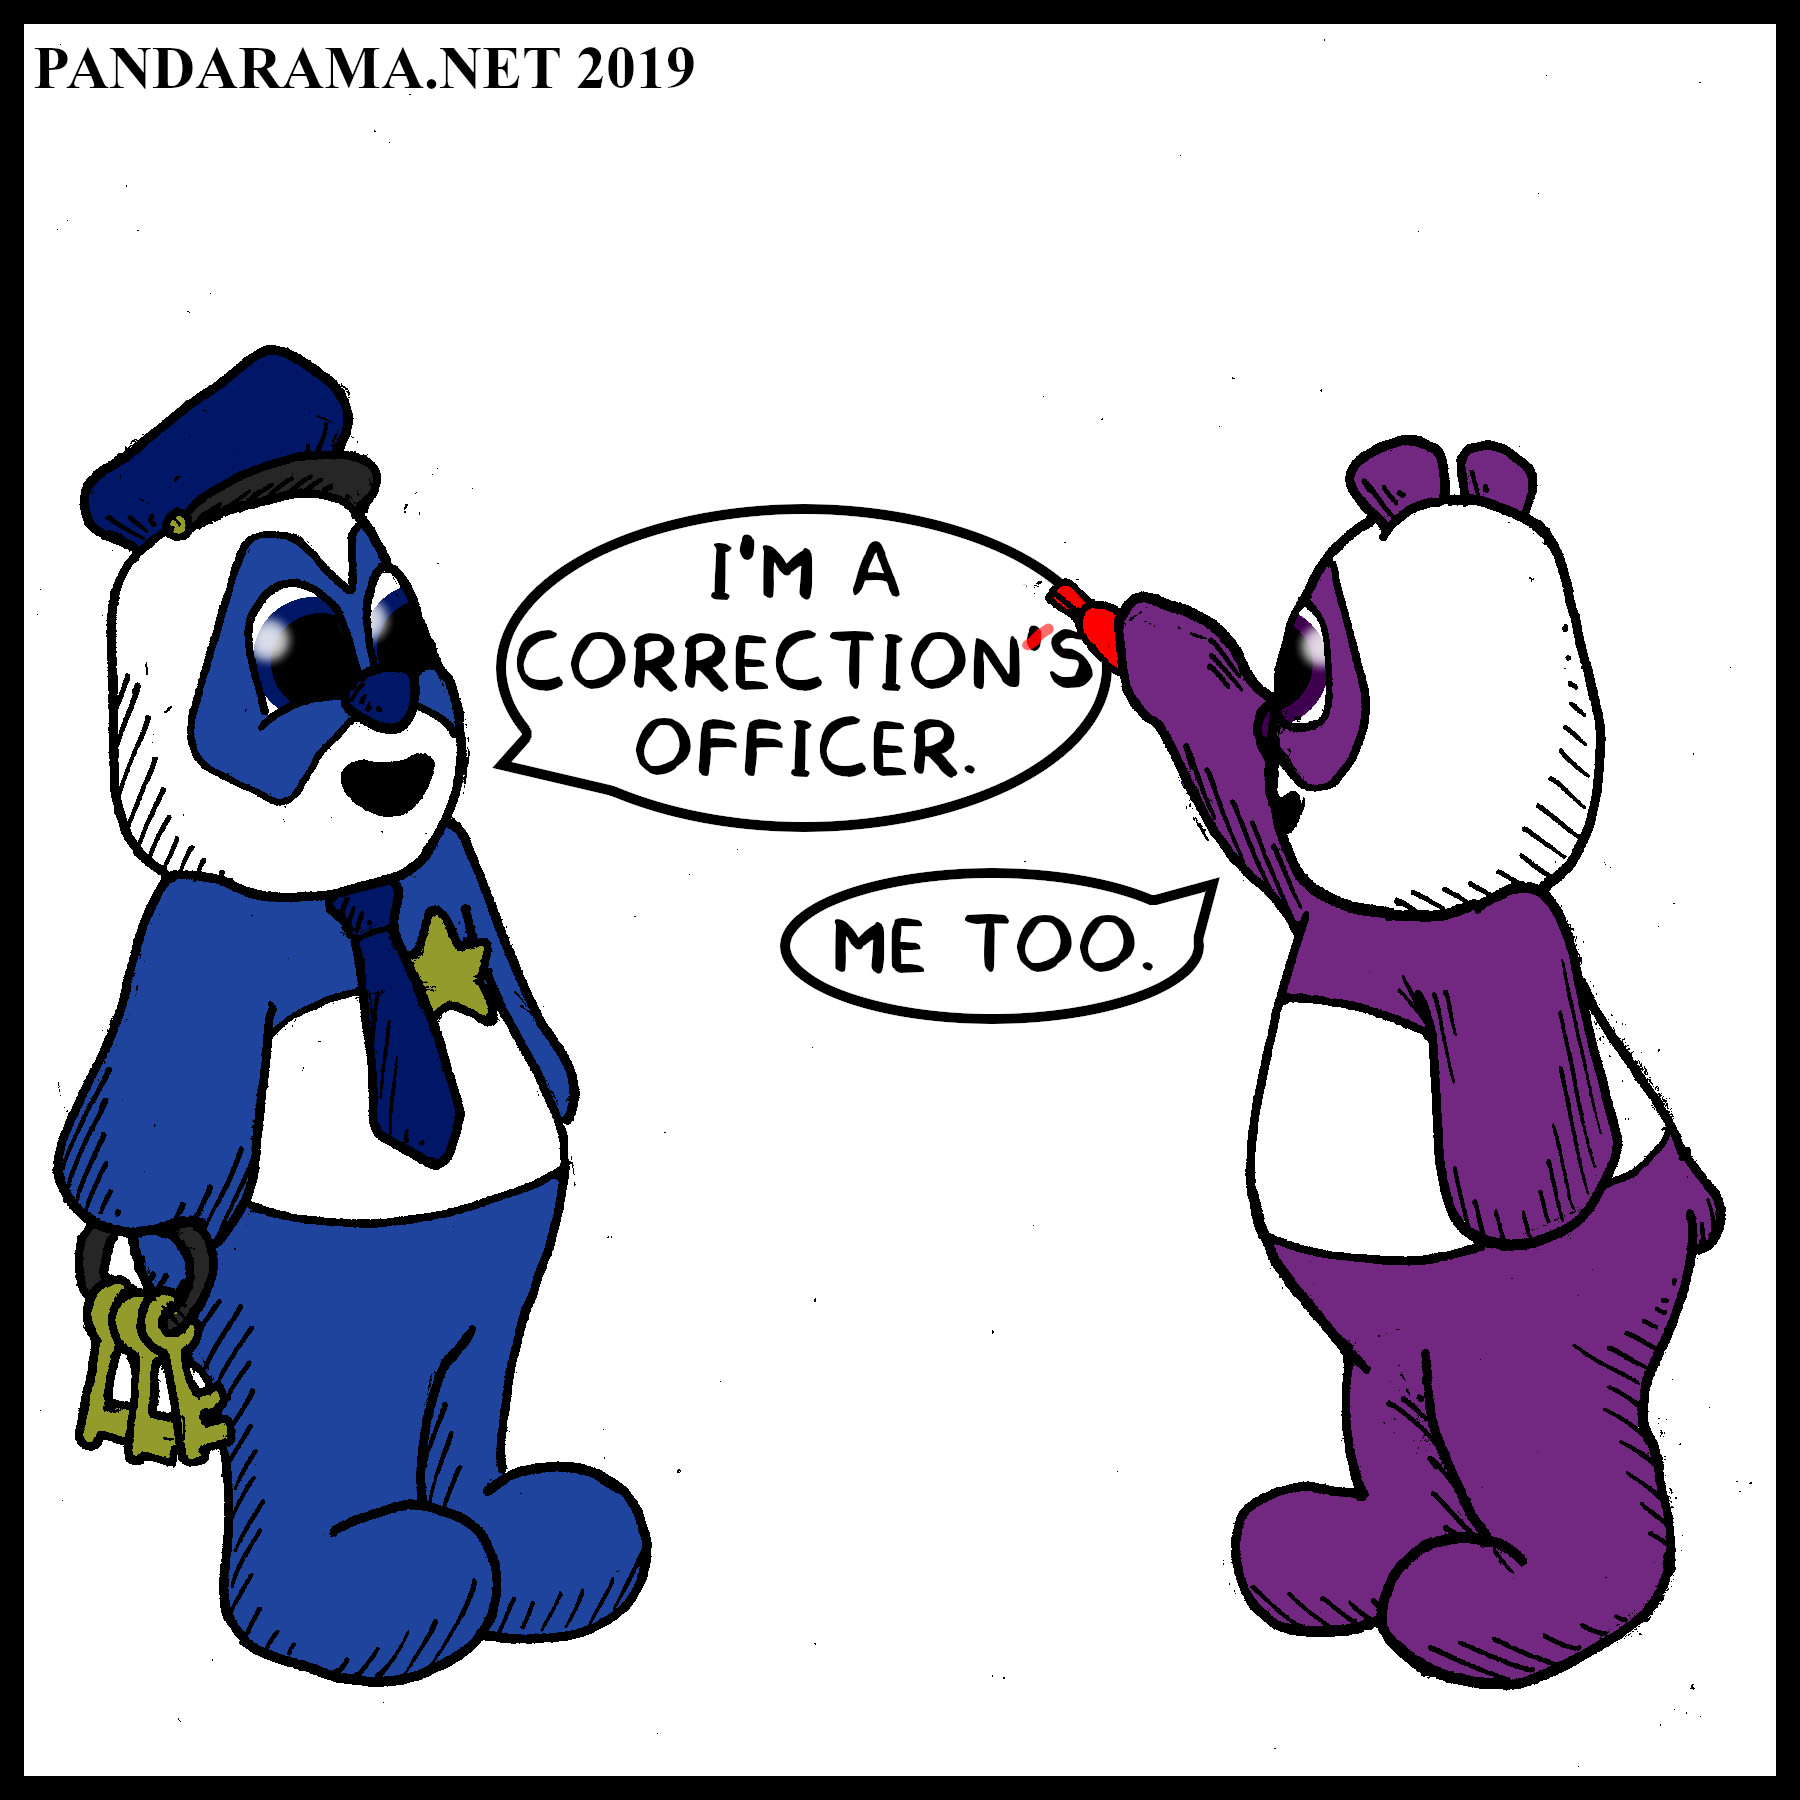 corrections officer, apostrophe erased from correction officer's word bubble